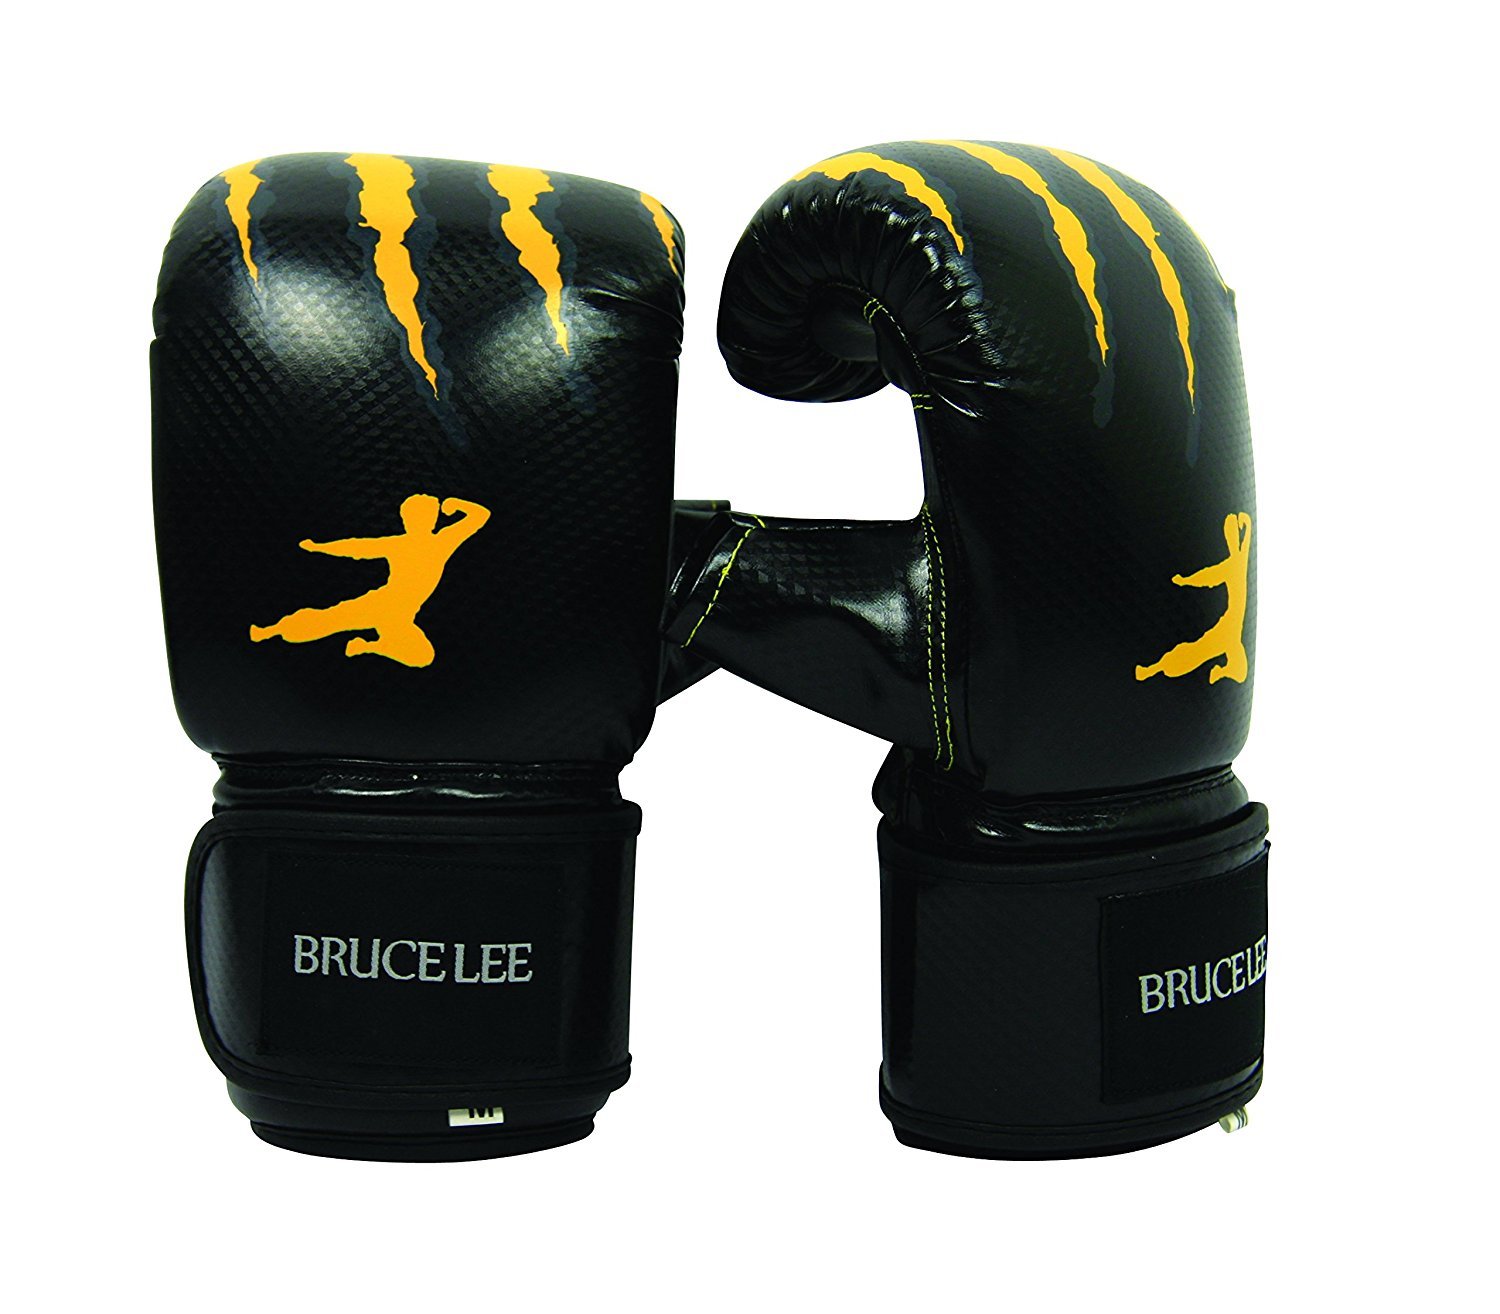 Brucelee Signature Boxing Gloves, Small